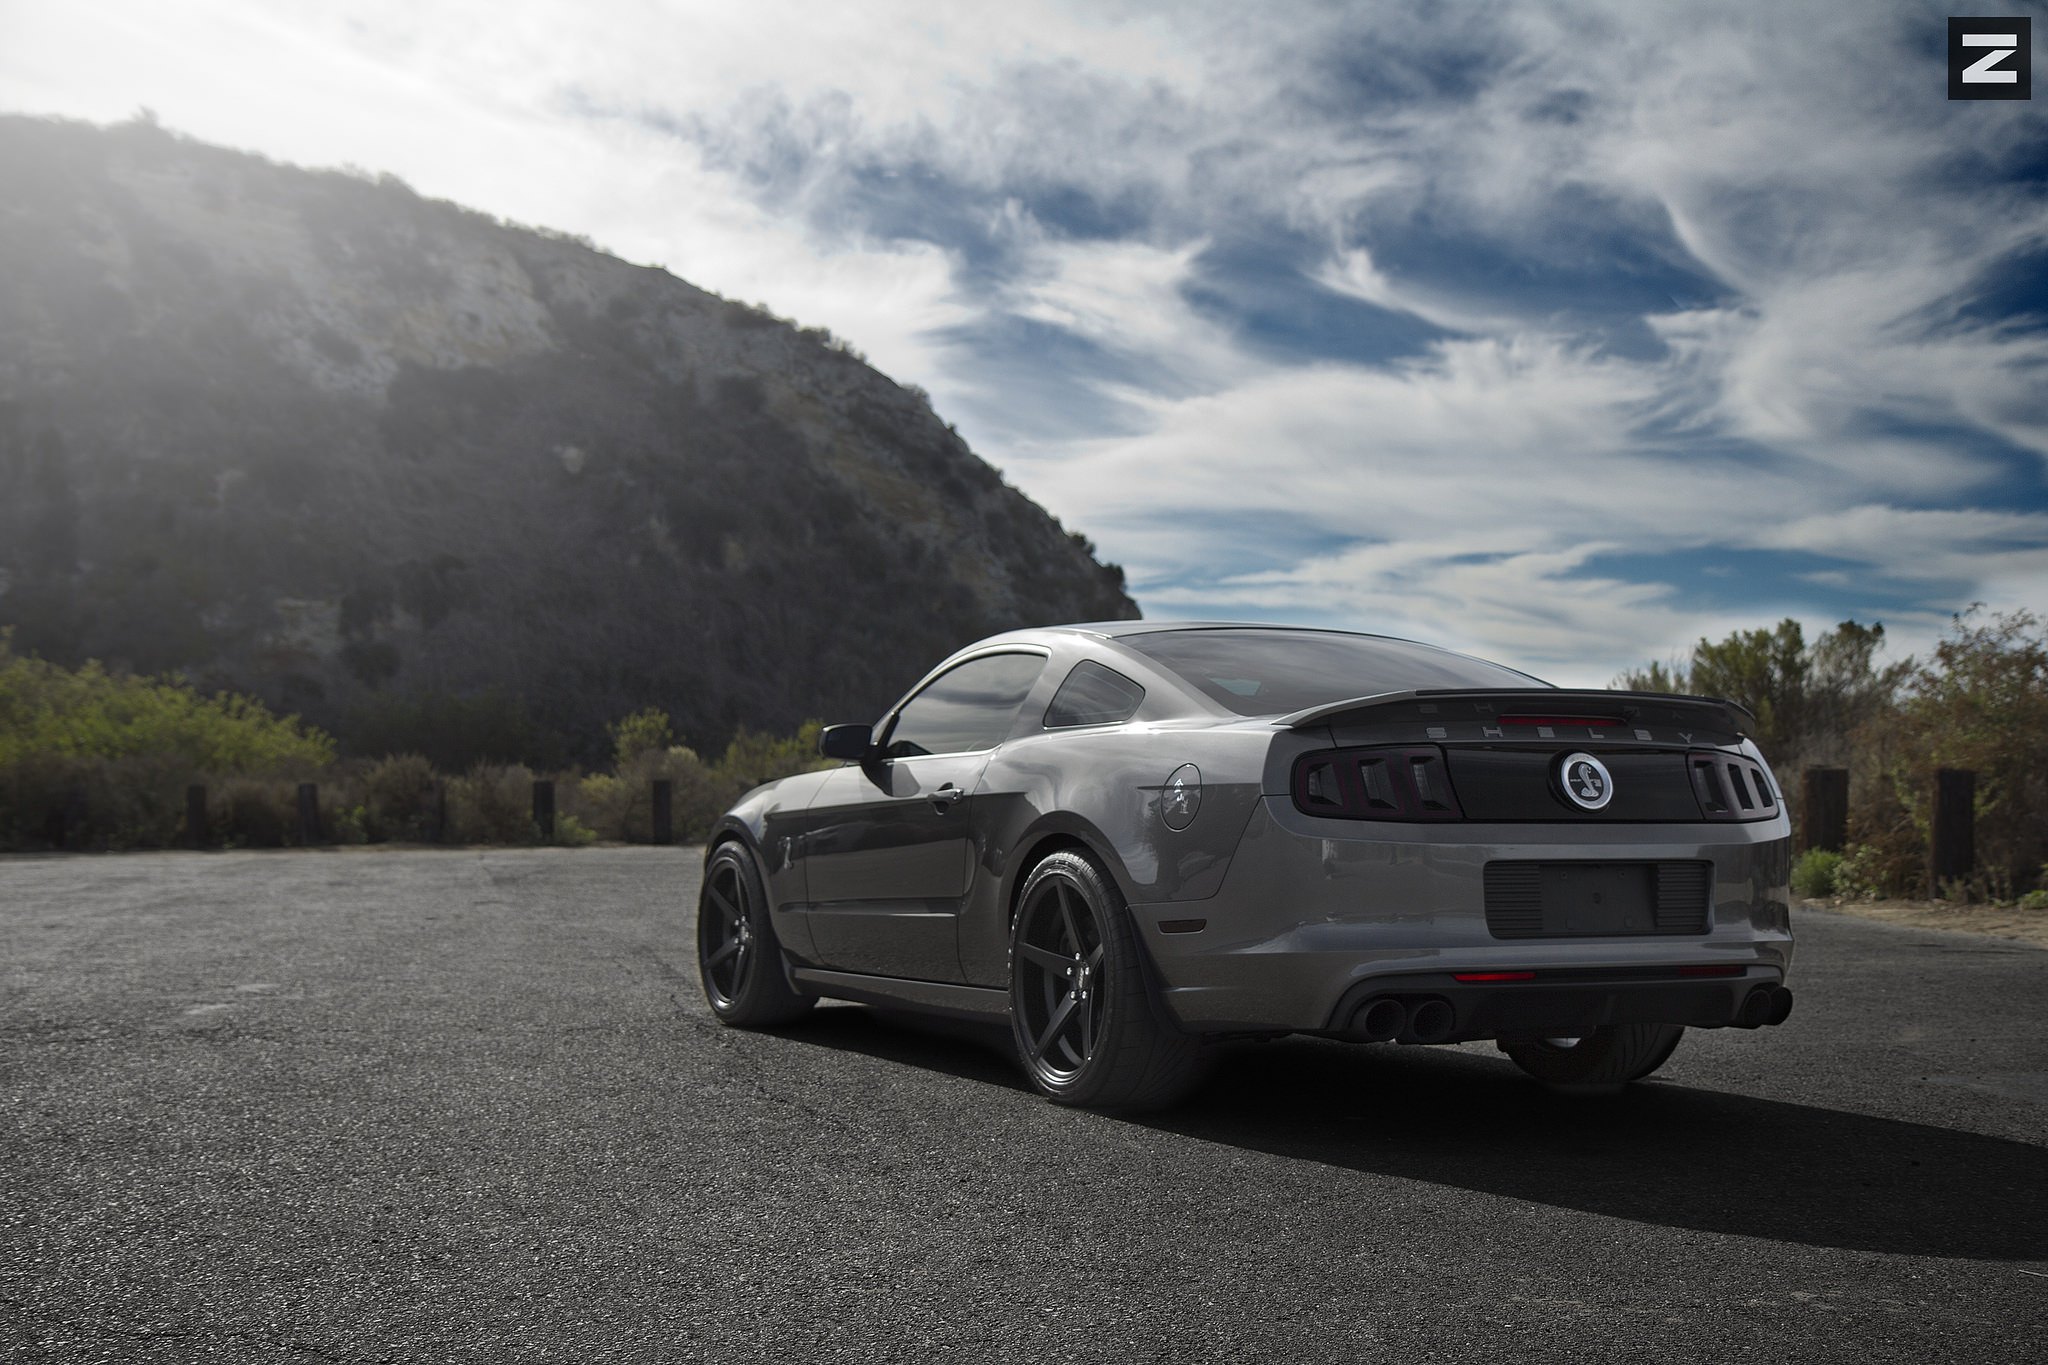 Custom Rear Spoiler on Gray Ford Mustang Shelby - Photo by Zito Wheels